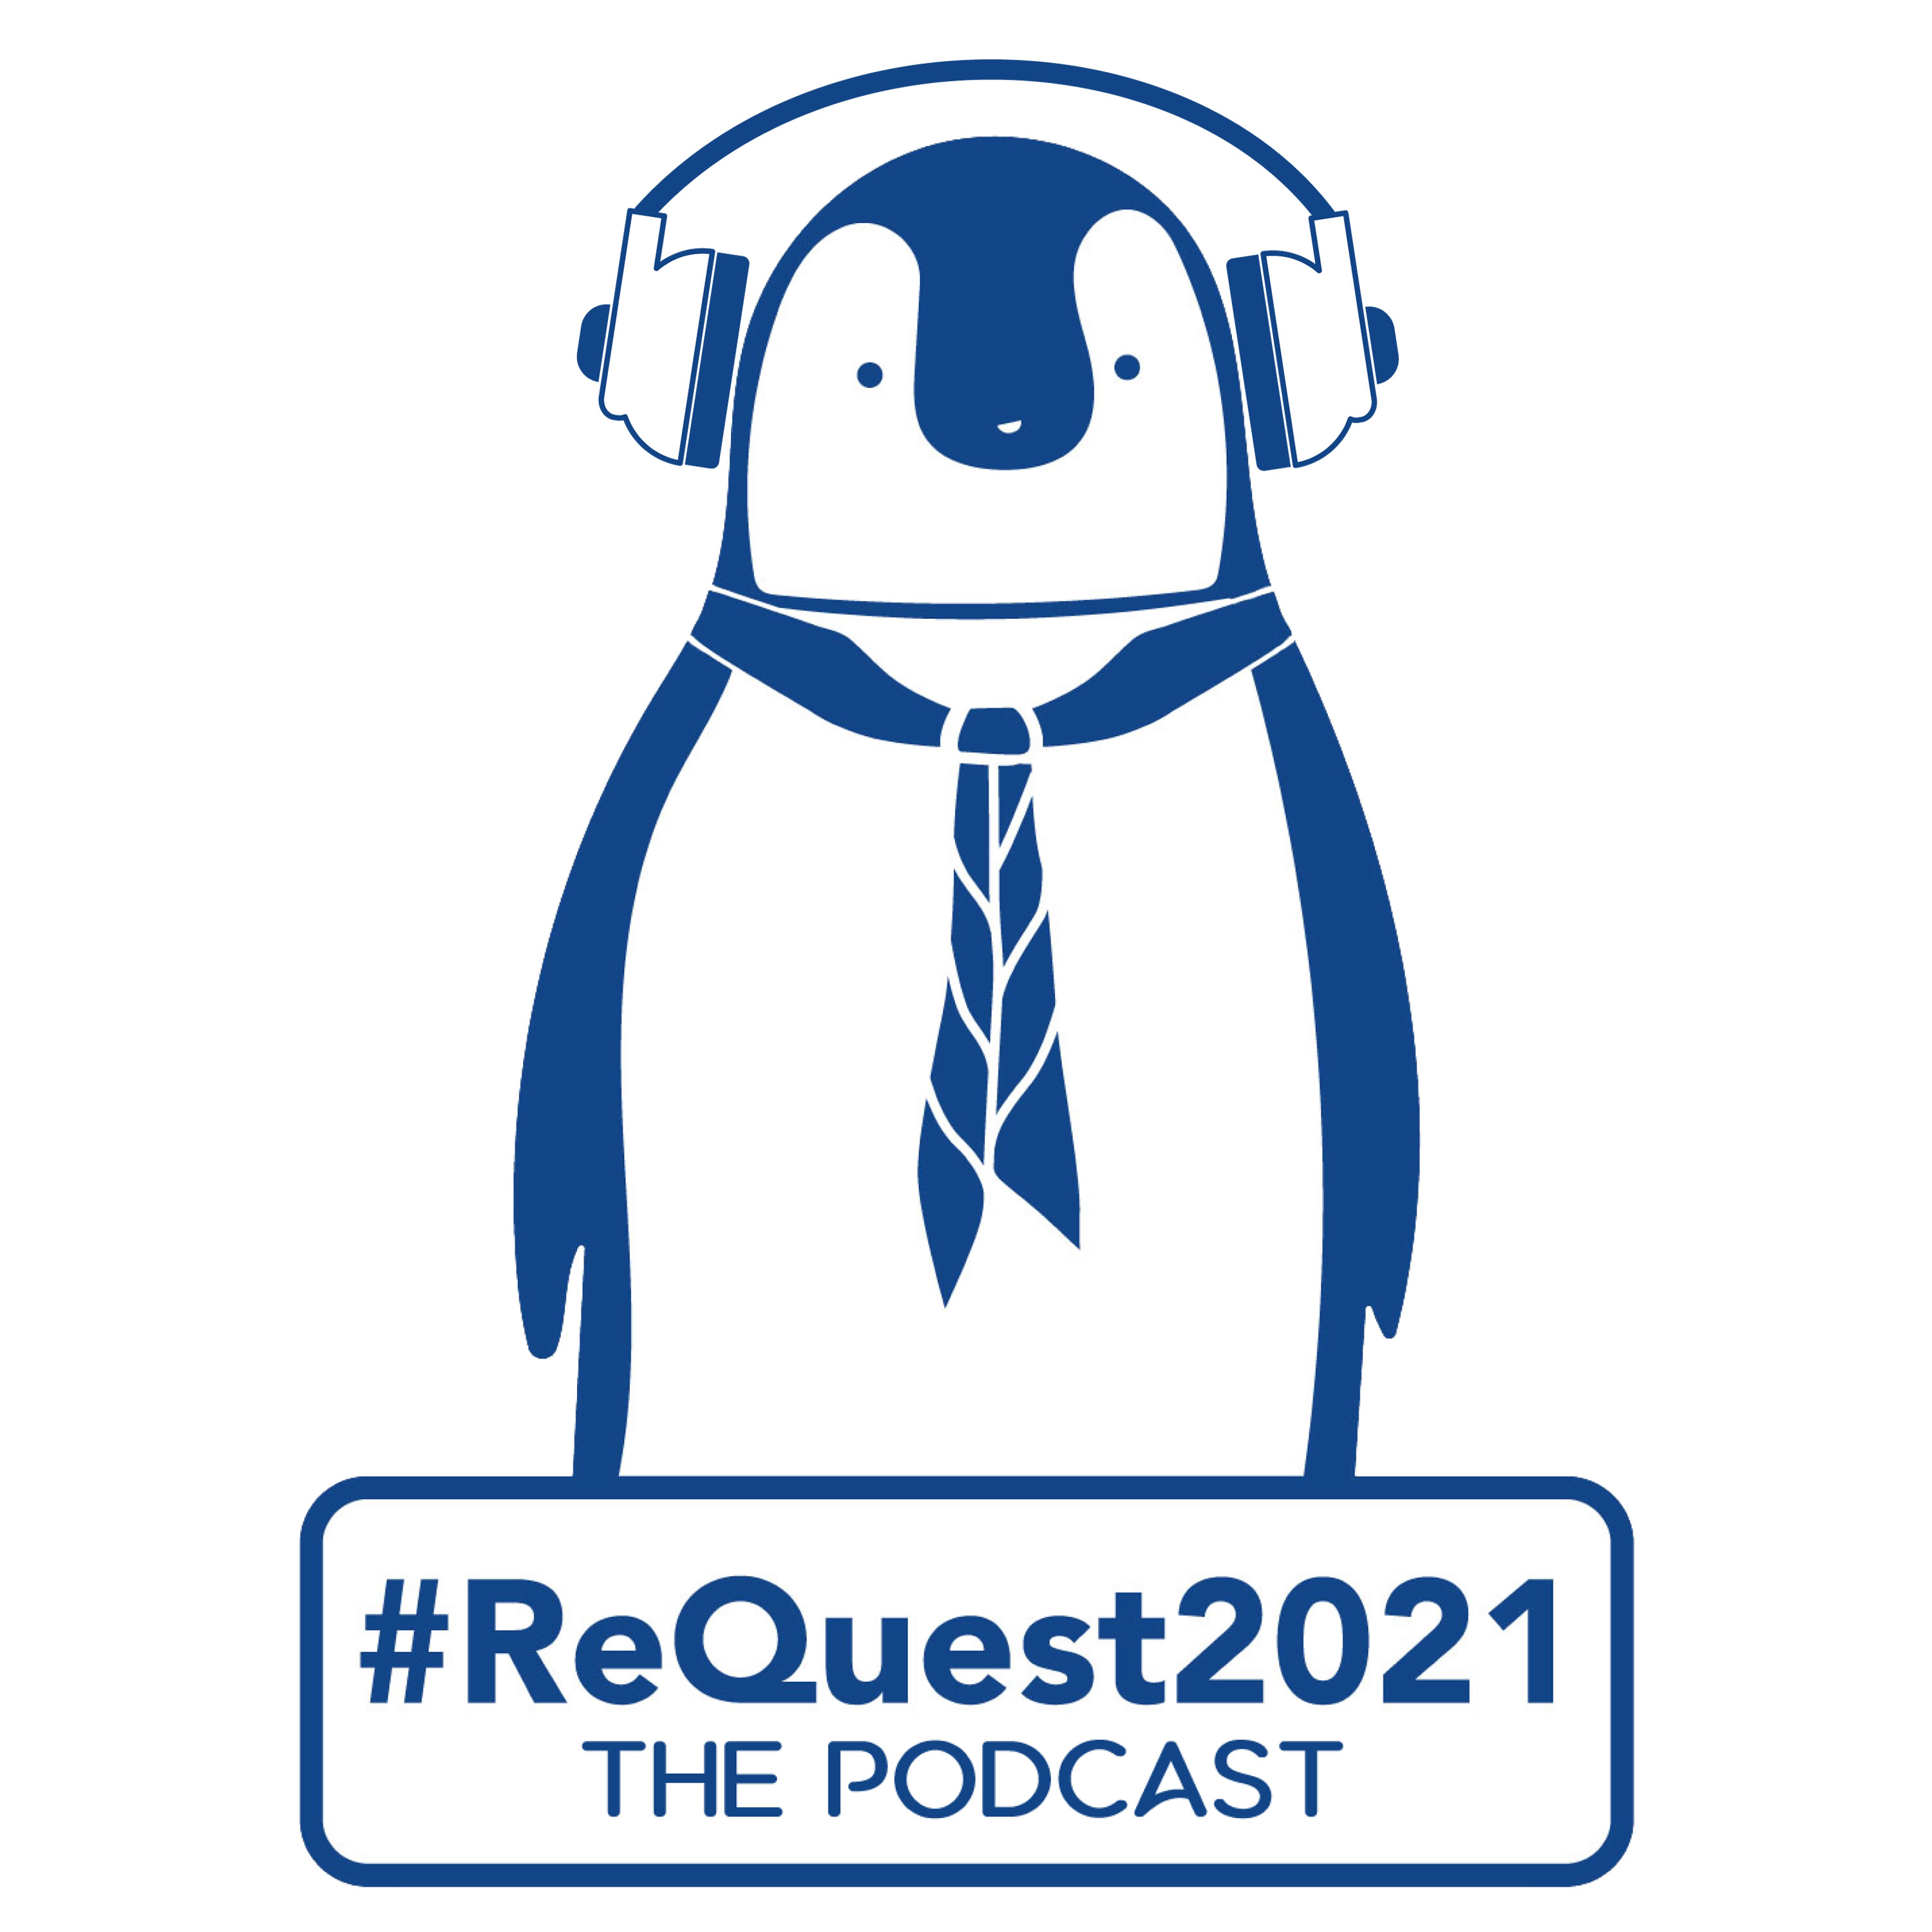 ReQuest2021 Podcast